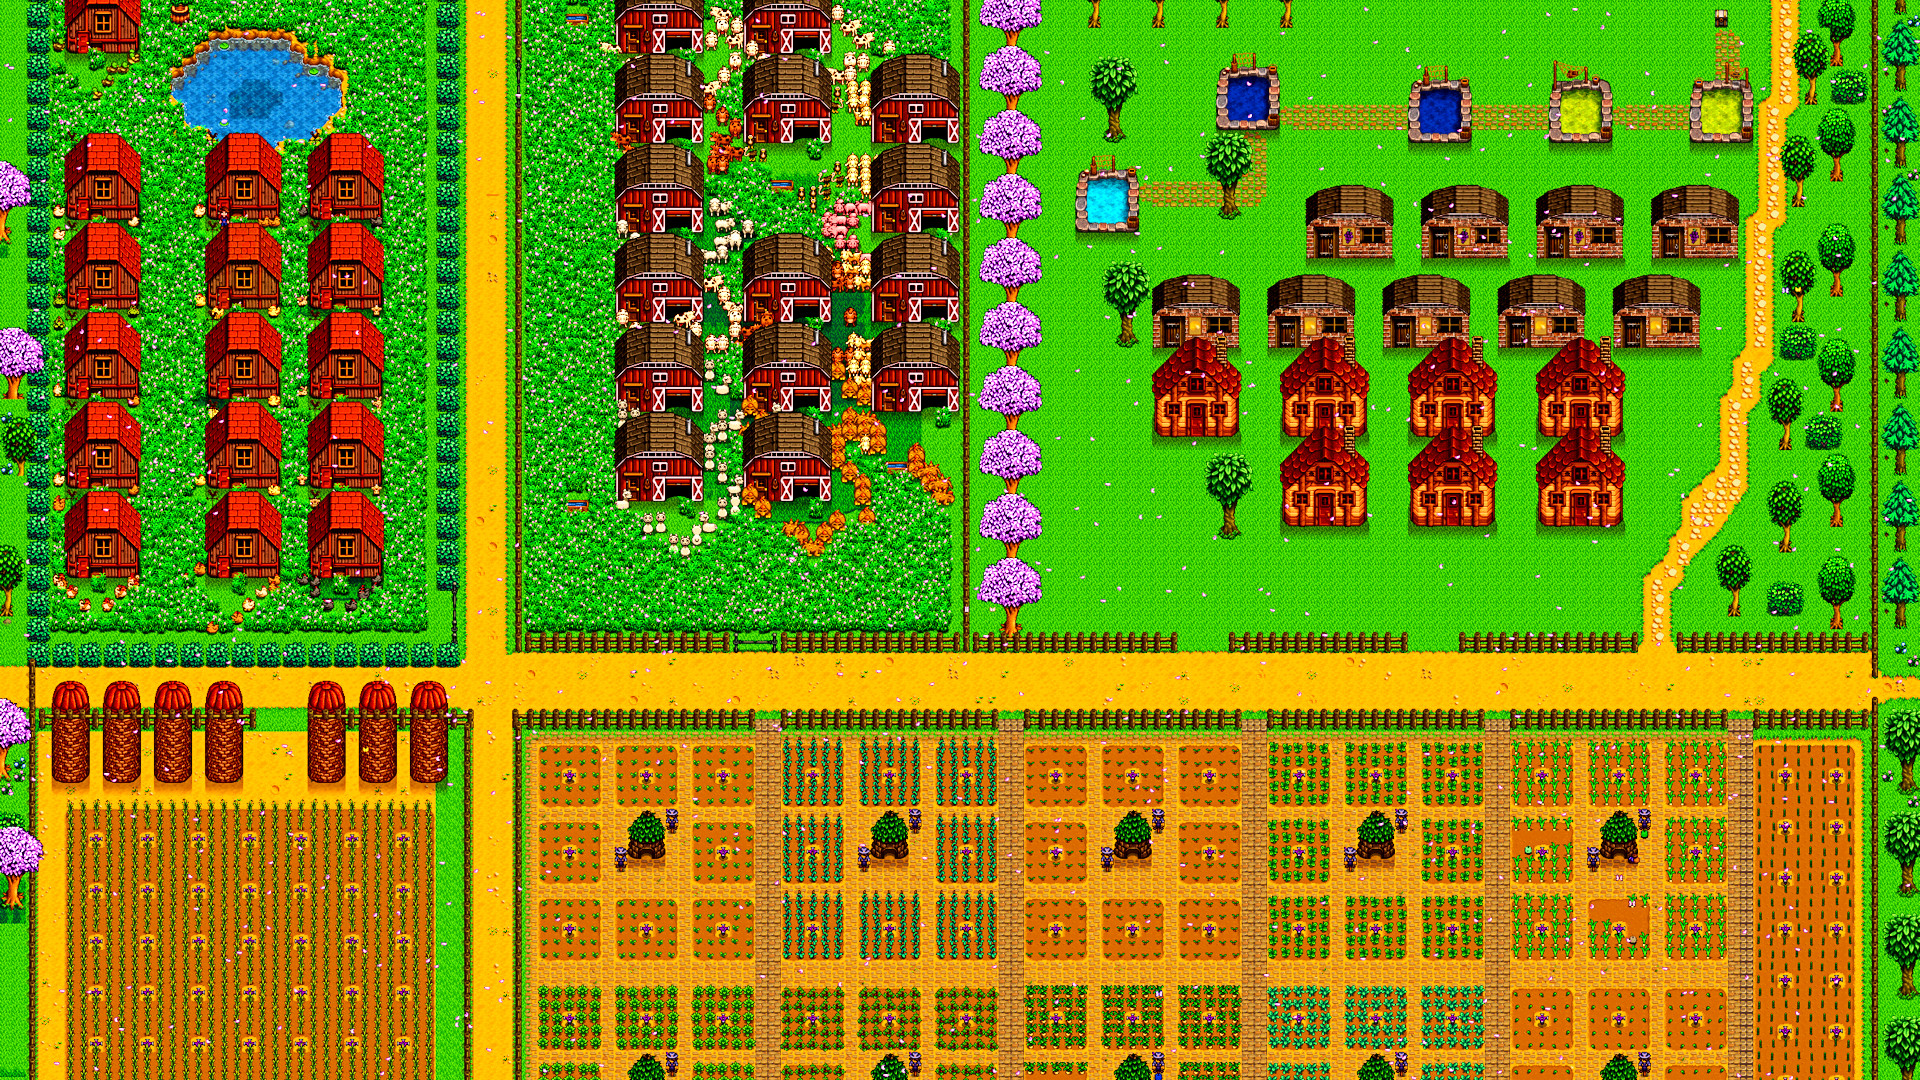 Stardew Valley mod lets you build a whole farming empire